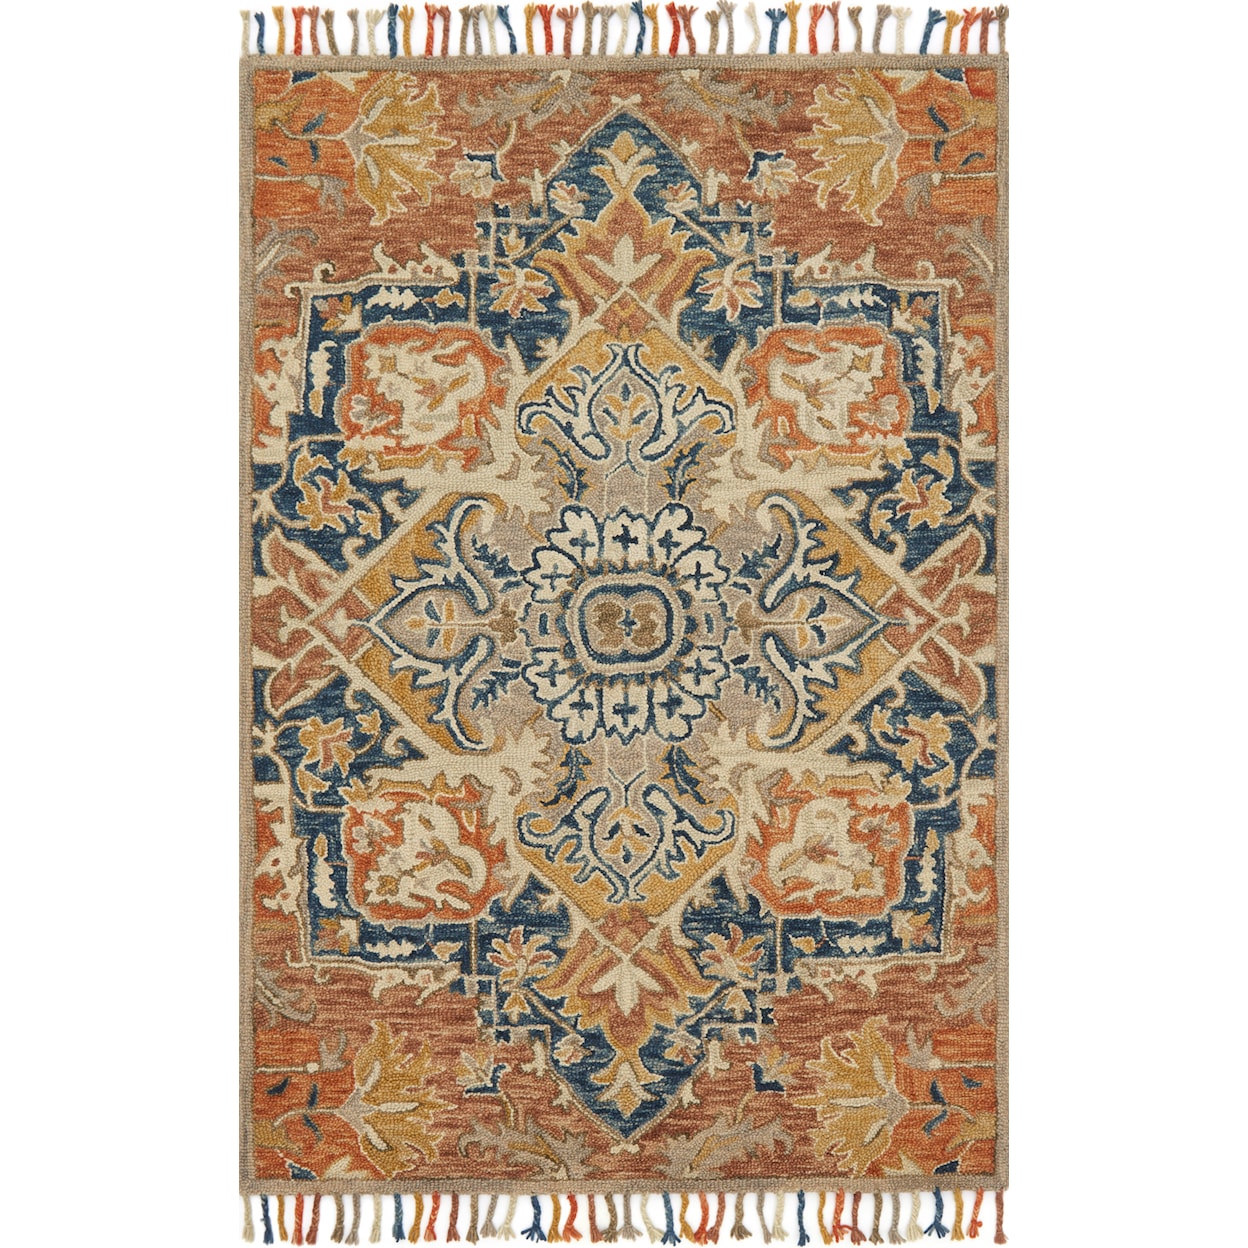 Reeds Rugs Zharah 5'-0" x 7'-6" Area Rug